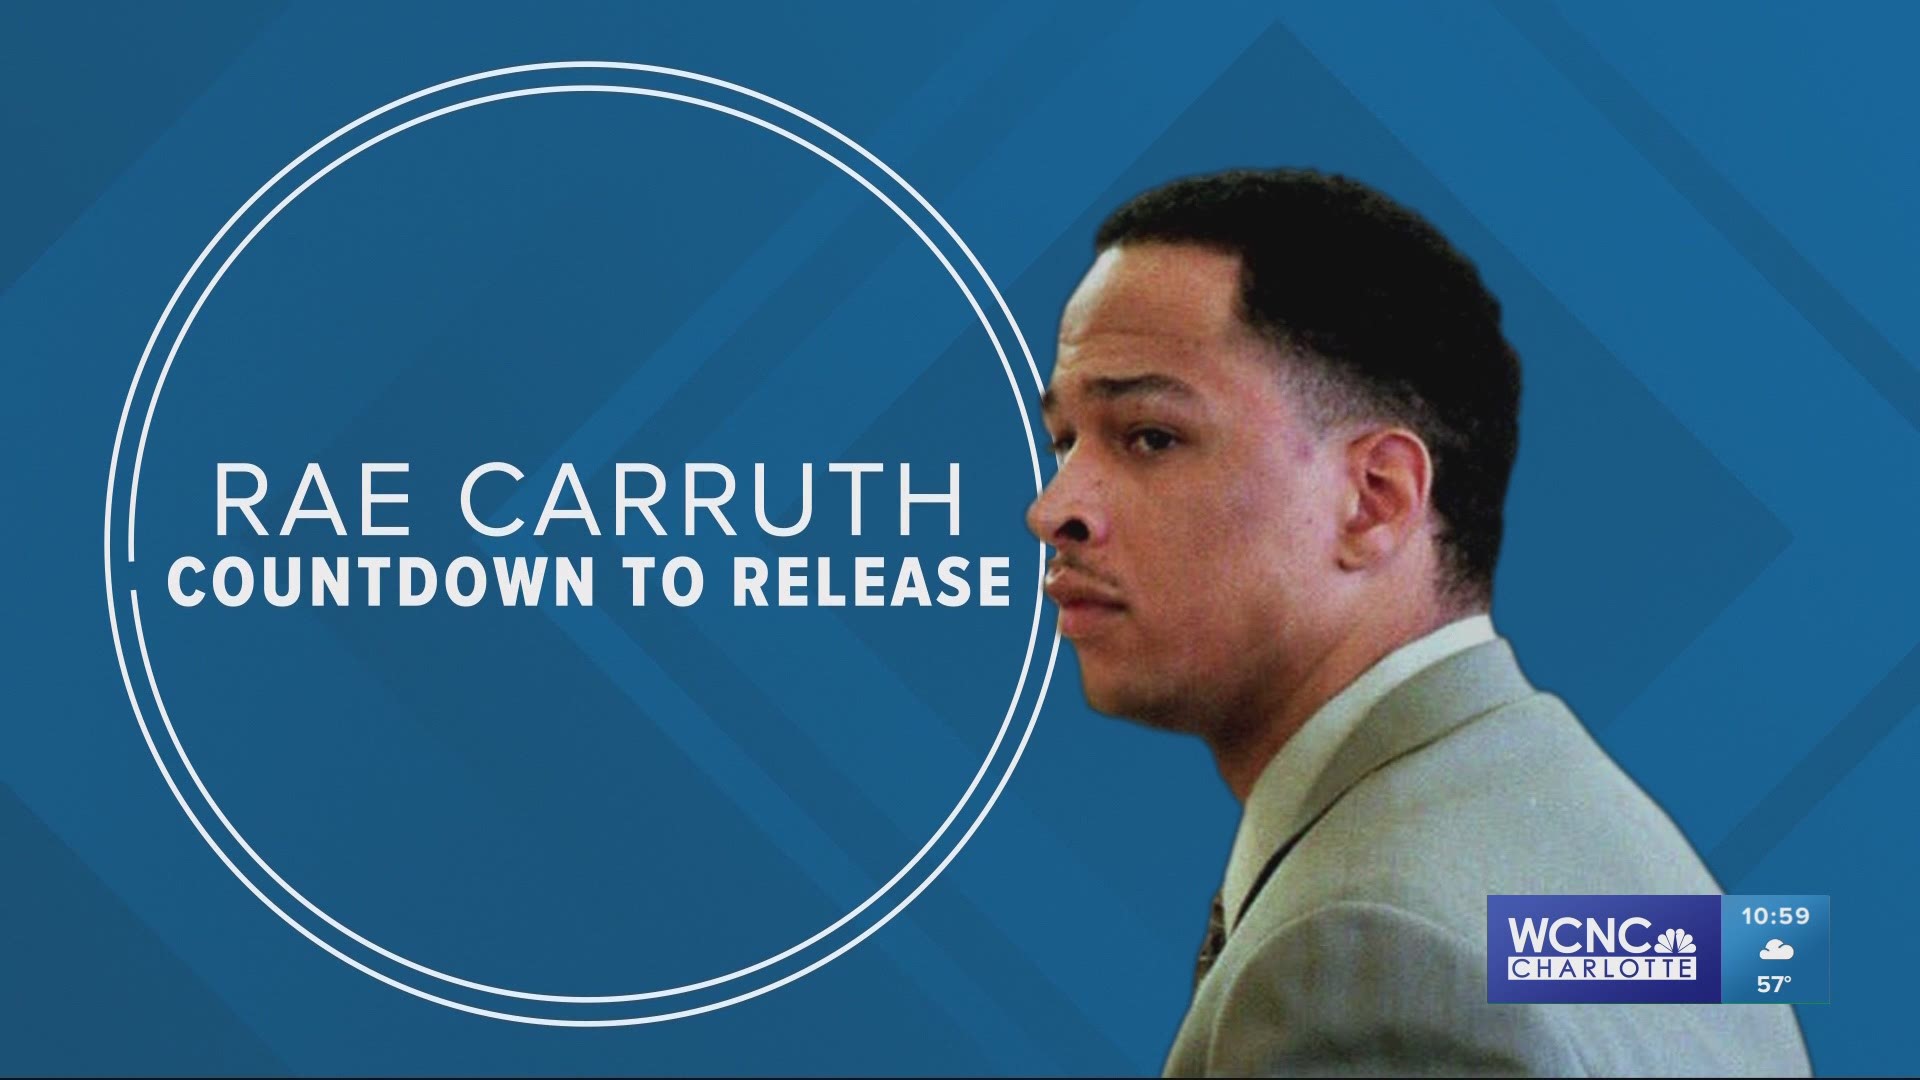 Ex-Panther Rae Carruth is looking to start his life over once he's released from prison.